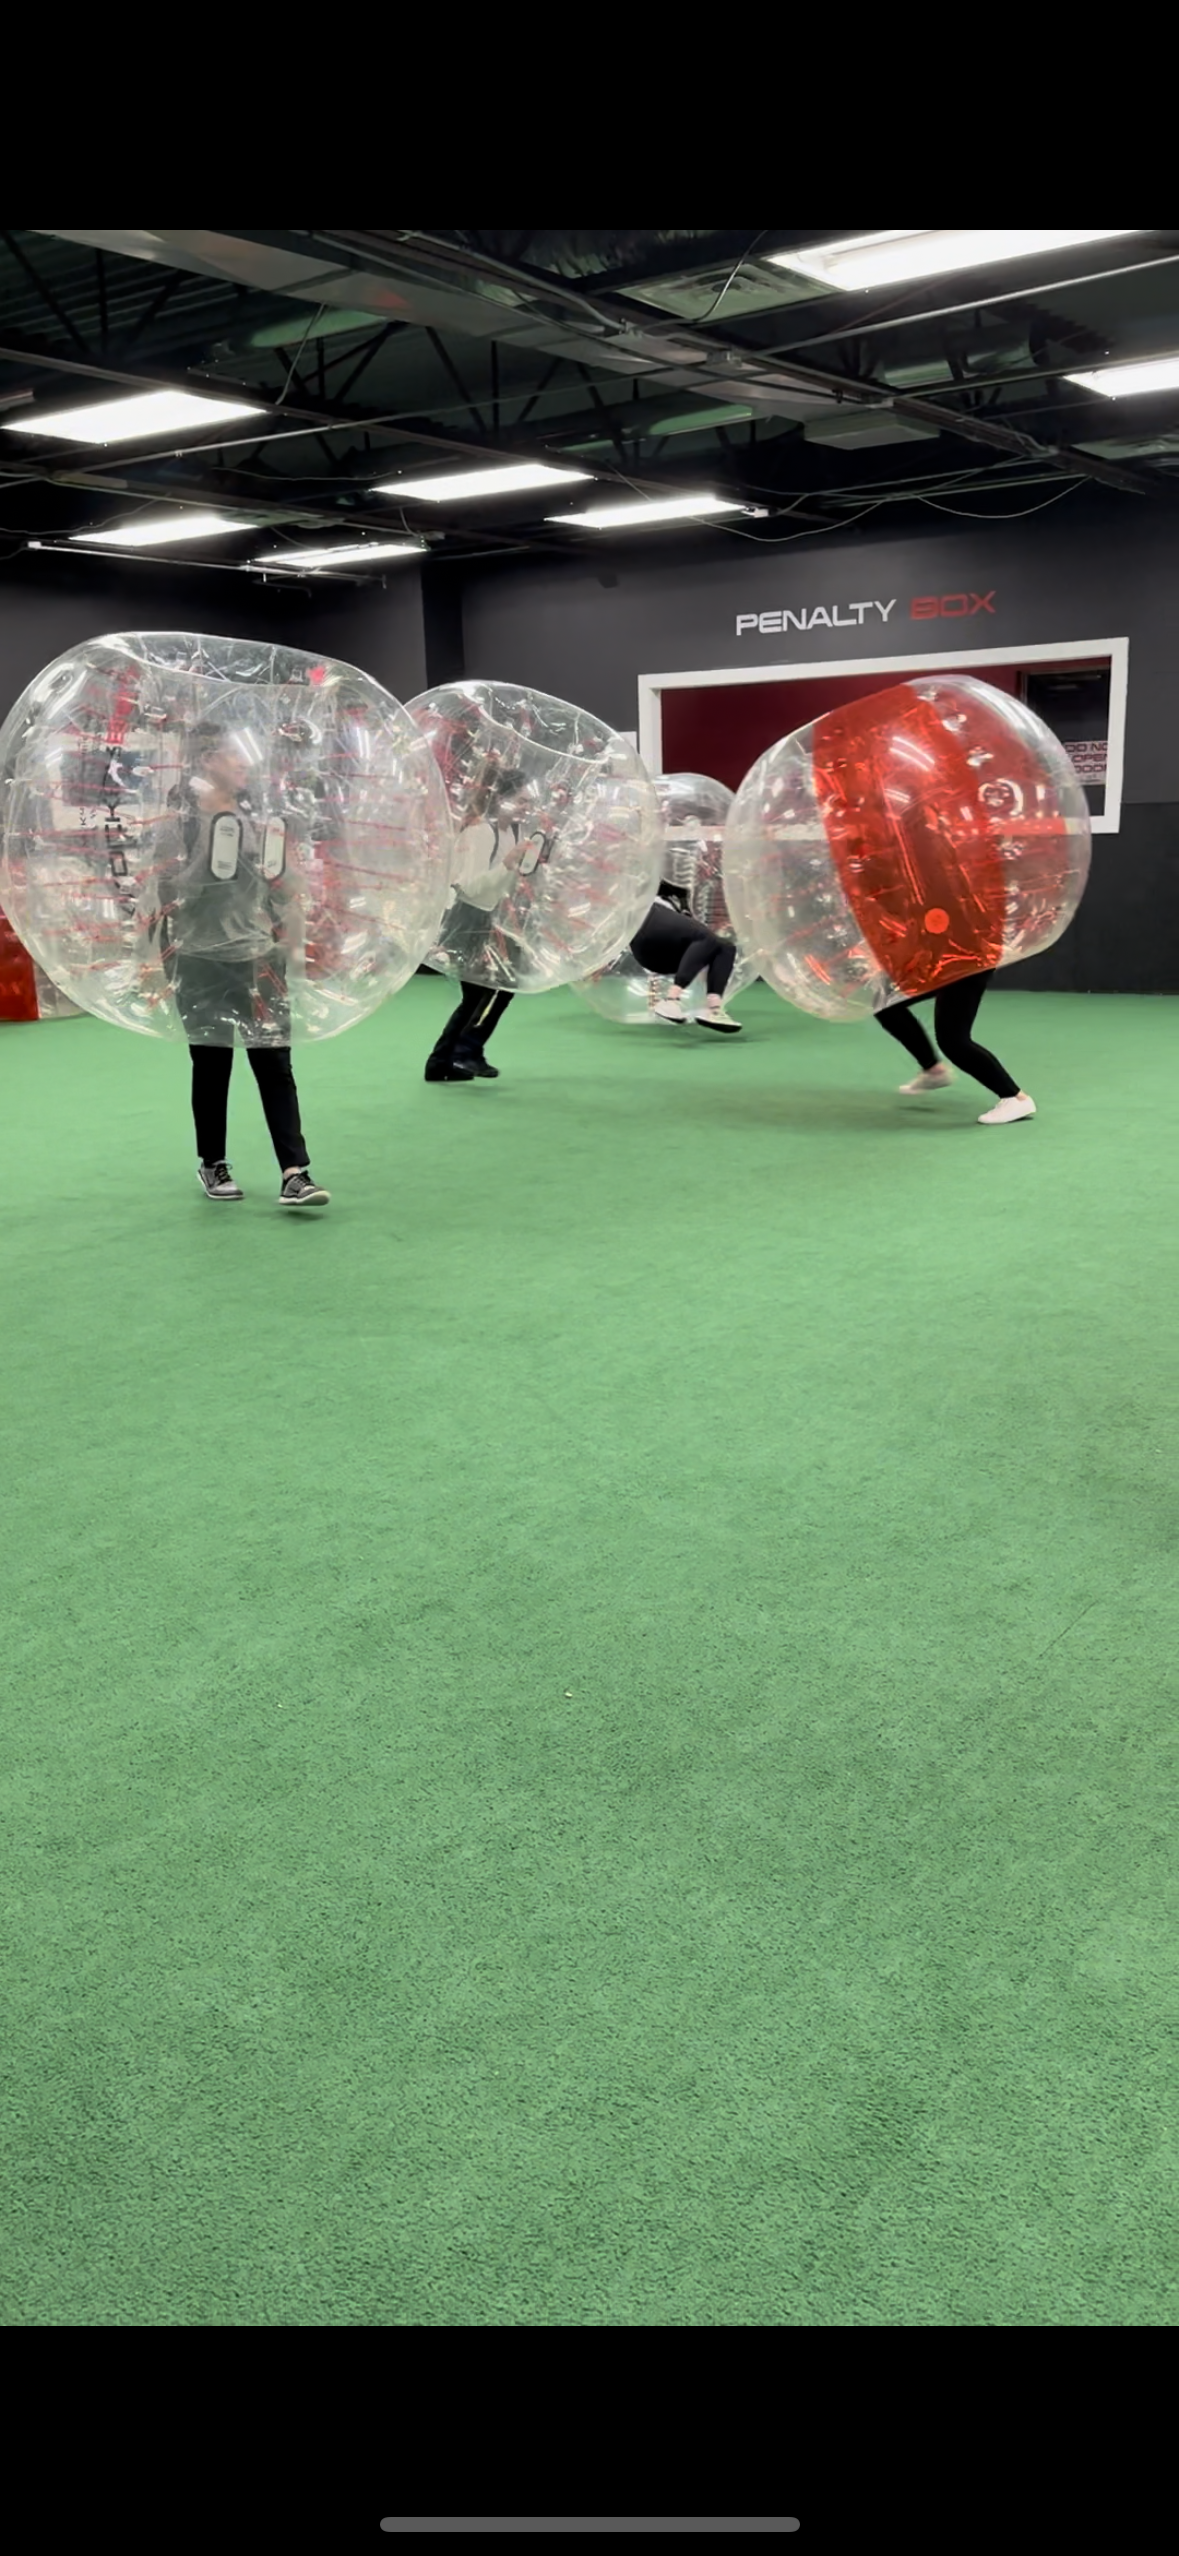 Up To 10 Knockerball Players 1 Hour Play Promo